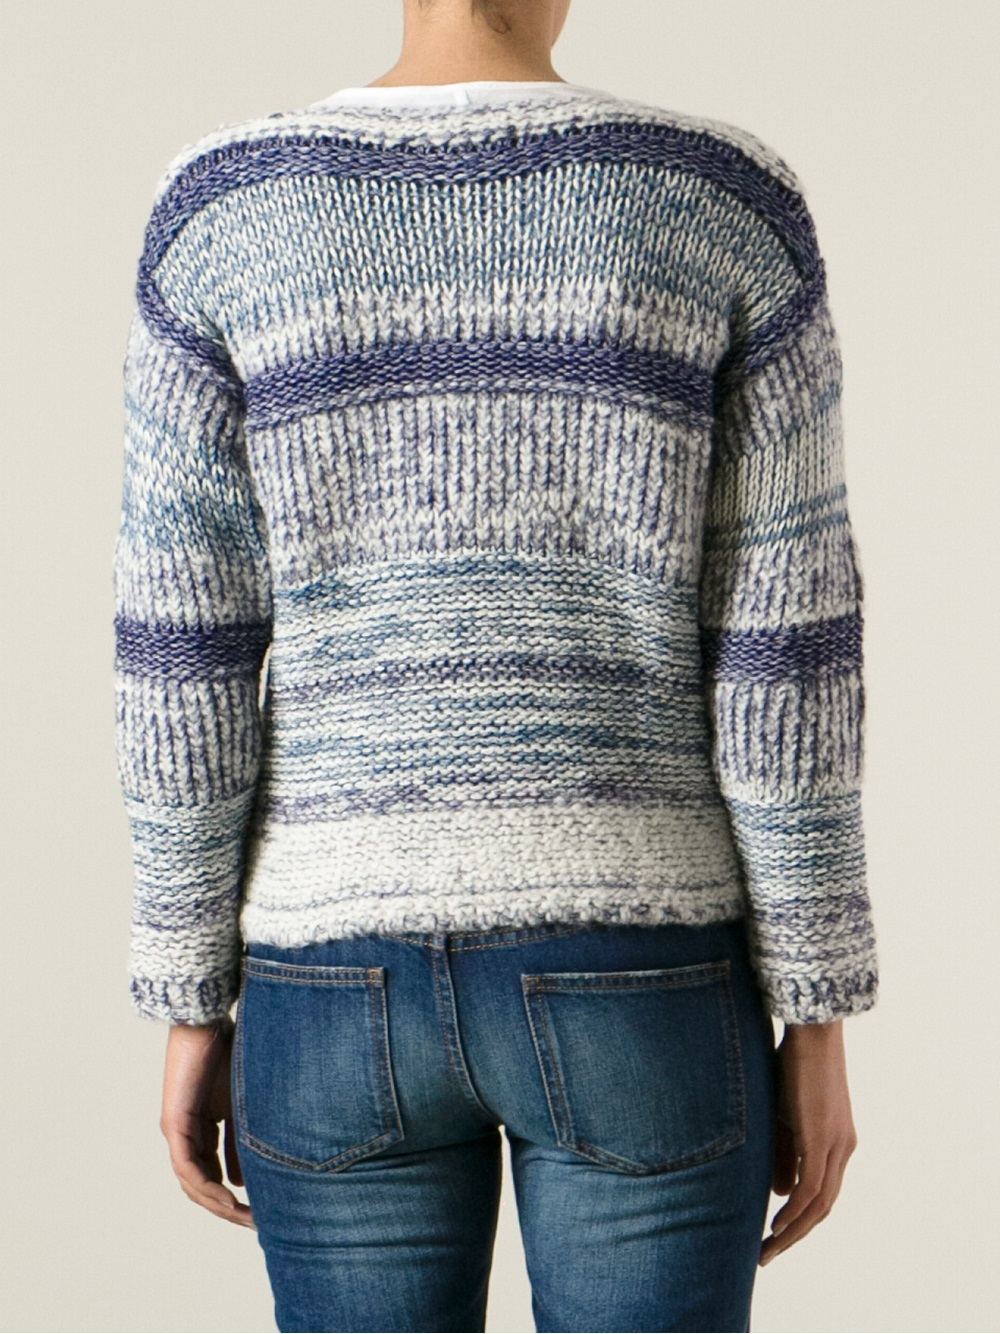 Étoile Isabel Marant Pit Shepard Knitted Textured Sweater in Blue - Lyst